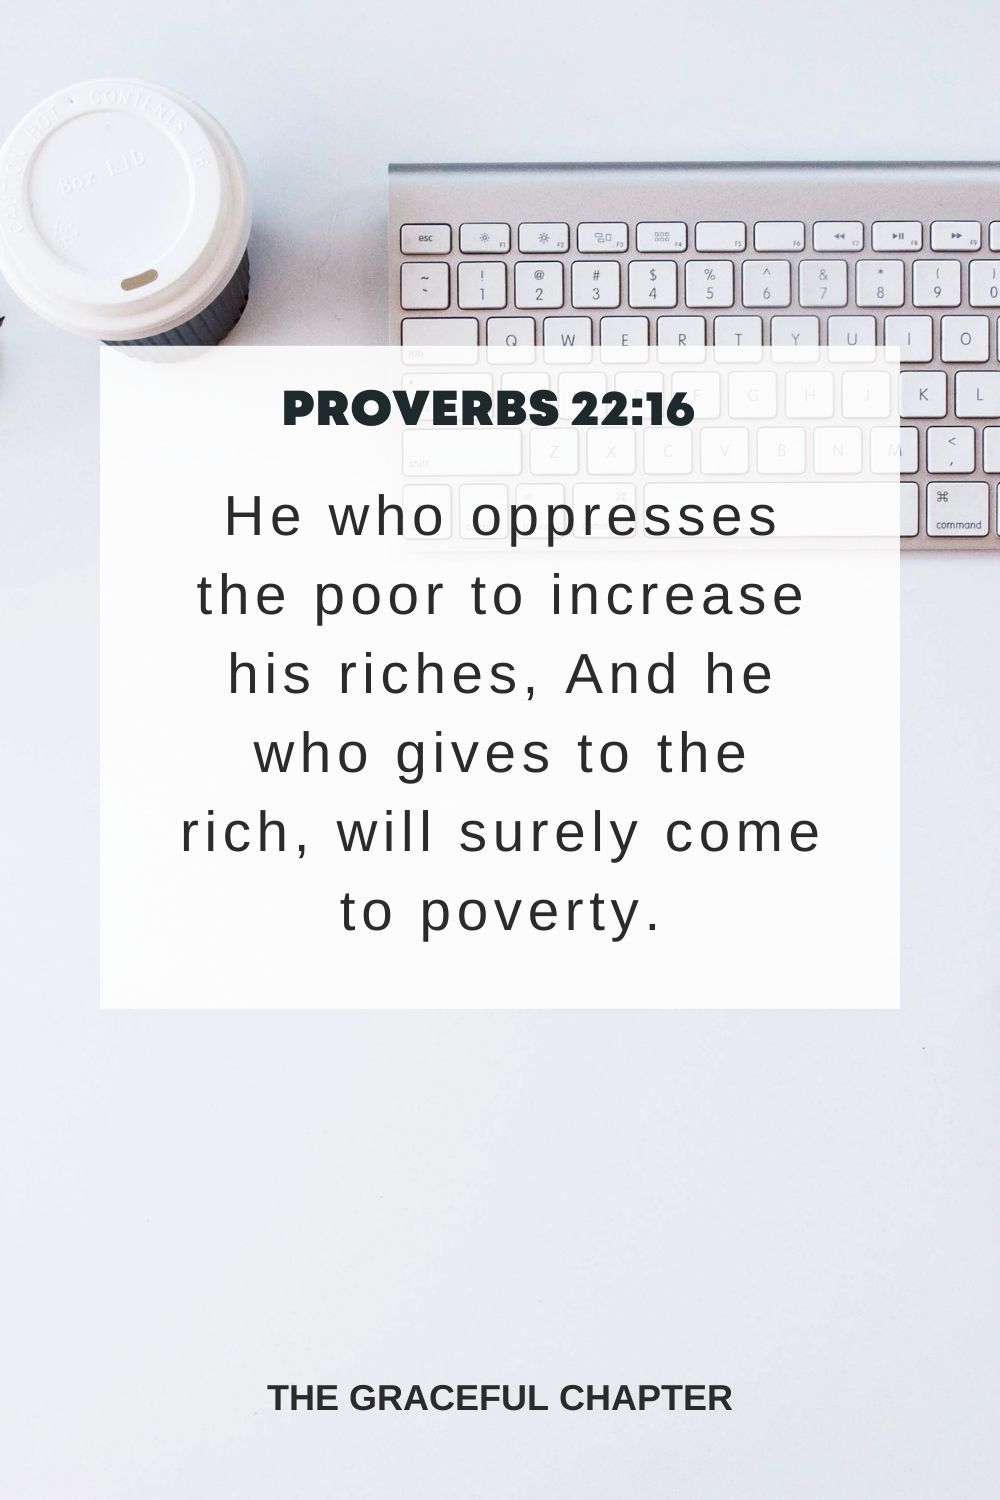 He who oppresses the poor to increase his riches, And he who gives to the rich, will surely come to poverty. Proverbs 22:16